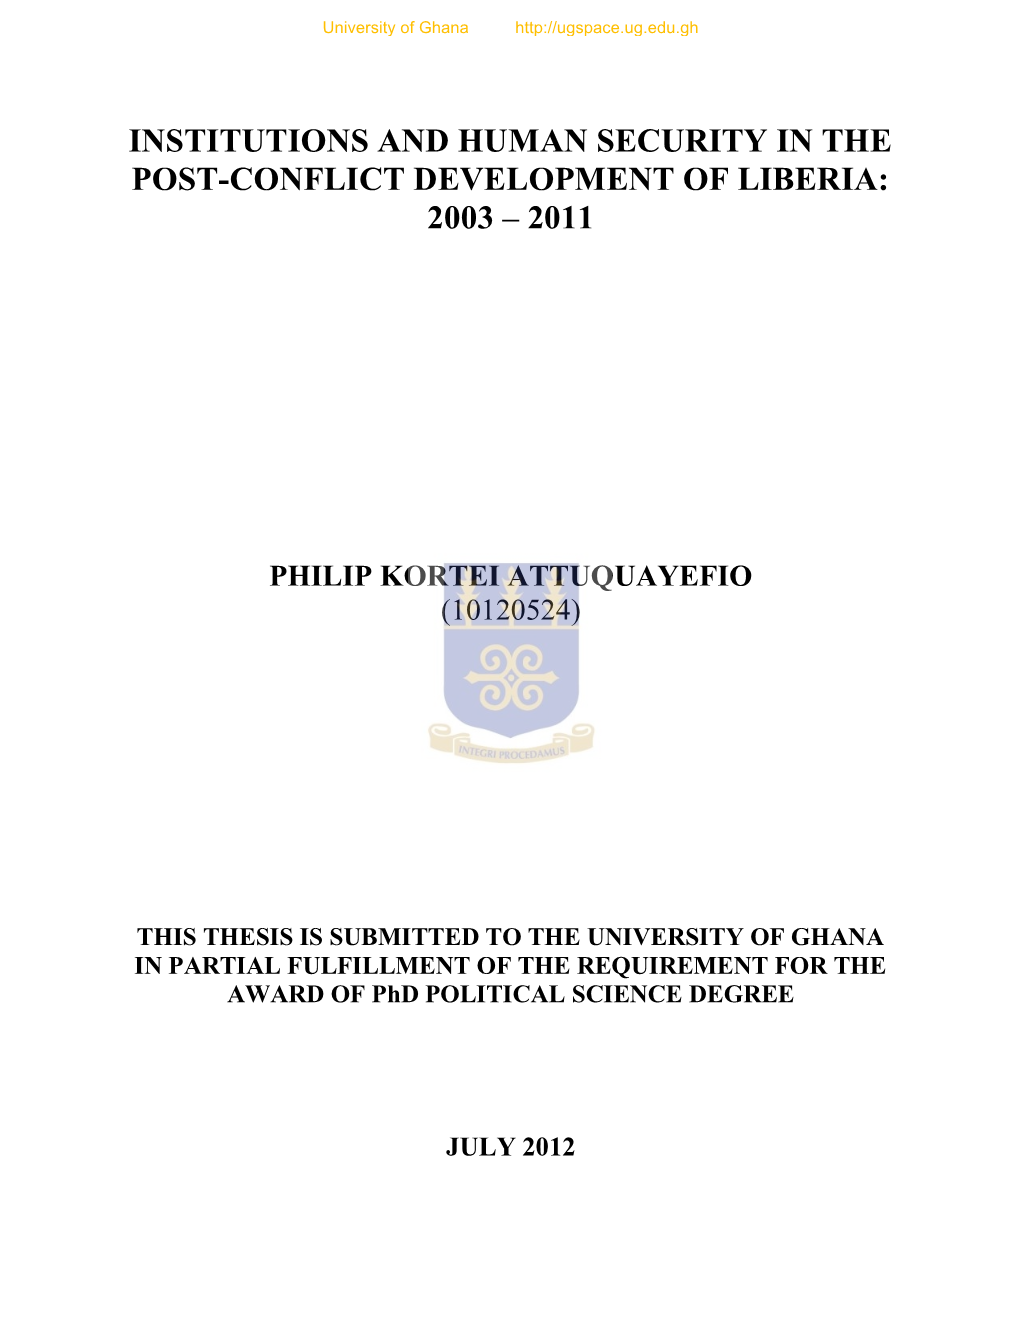 Institutions and Human Security in the Post-Conflict Development of Liberia: 2003 – 2011